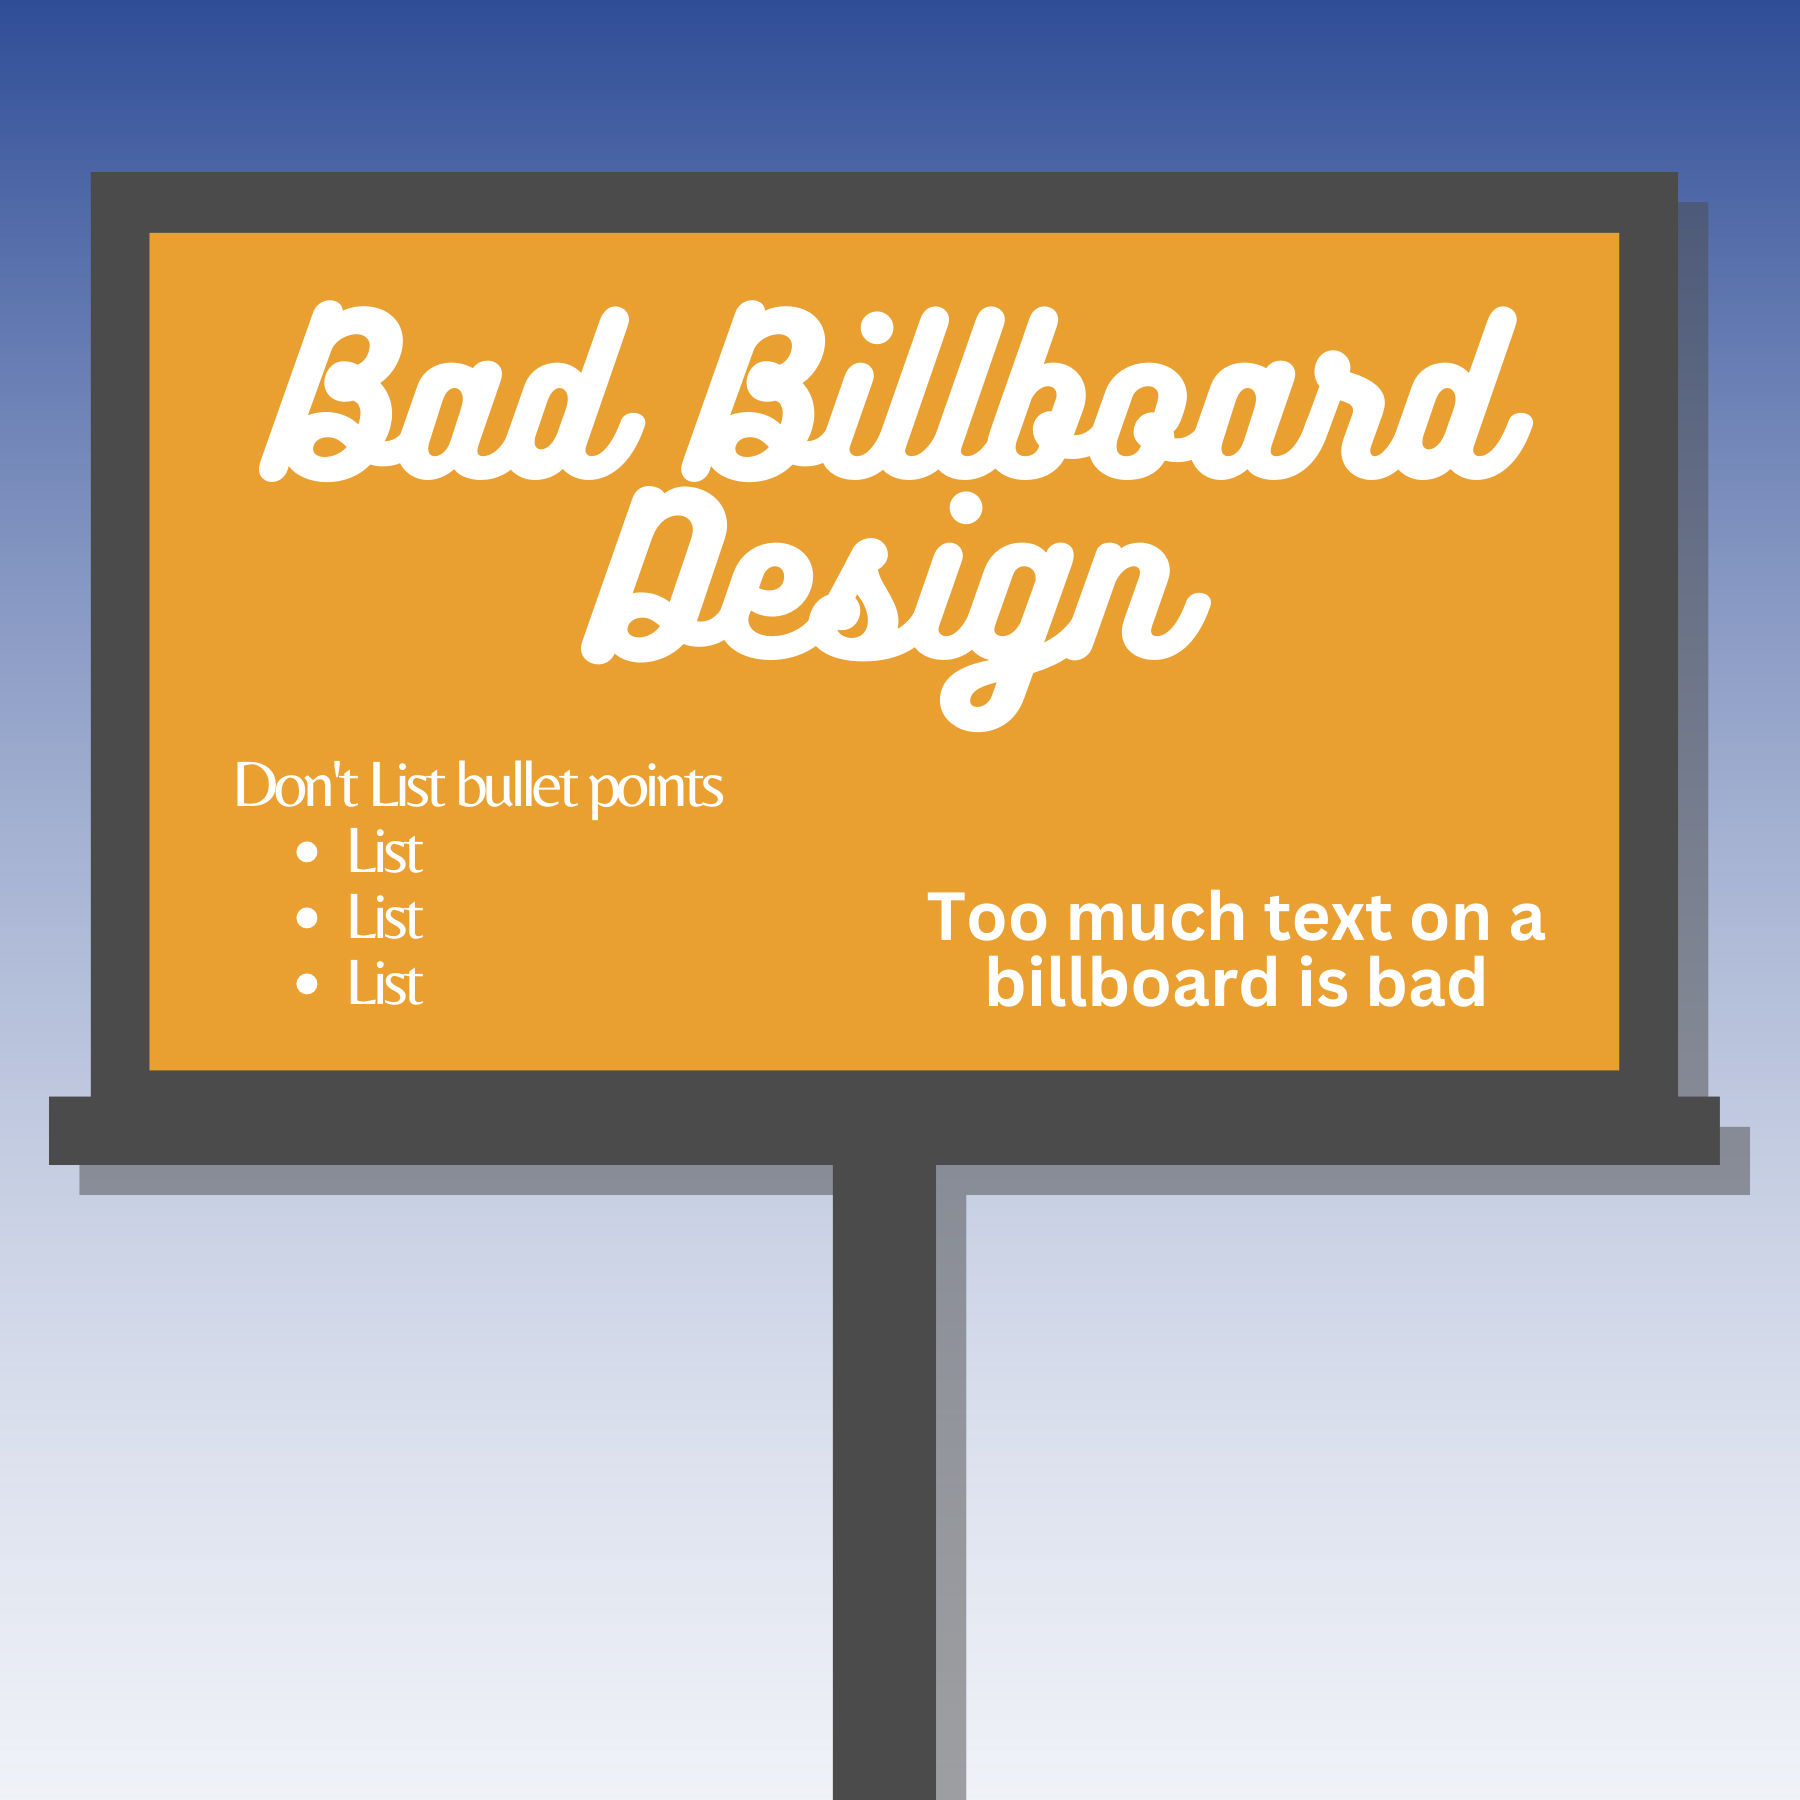 4 Mistakes That Will Make Your Billboard Unreadable